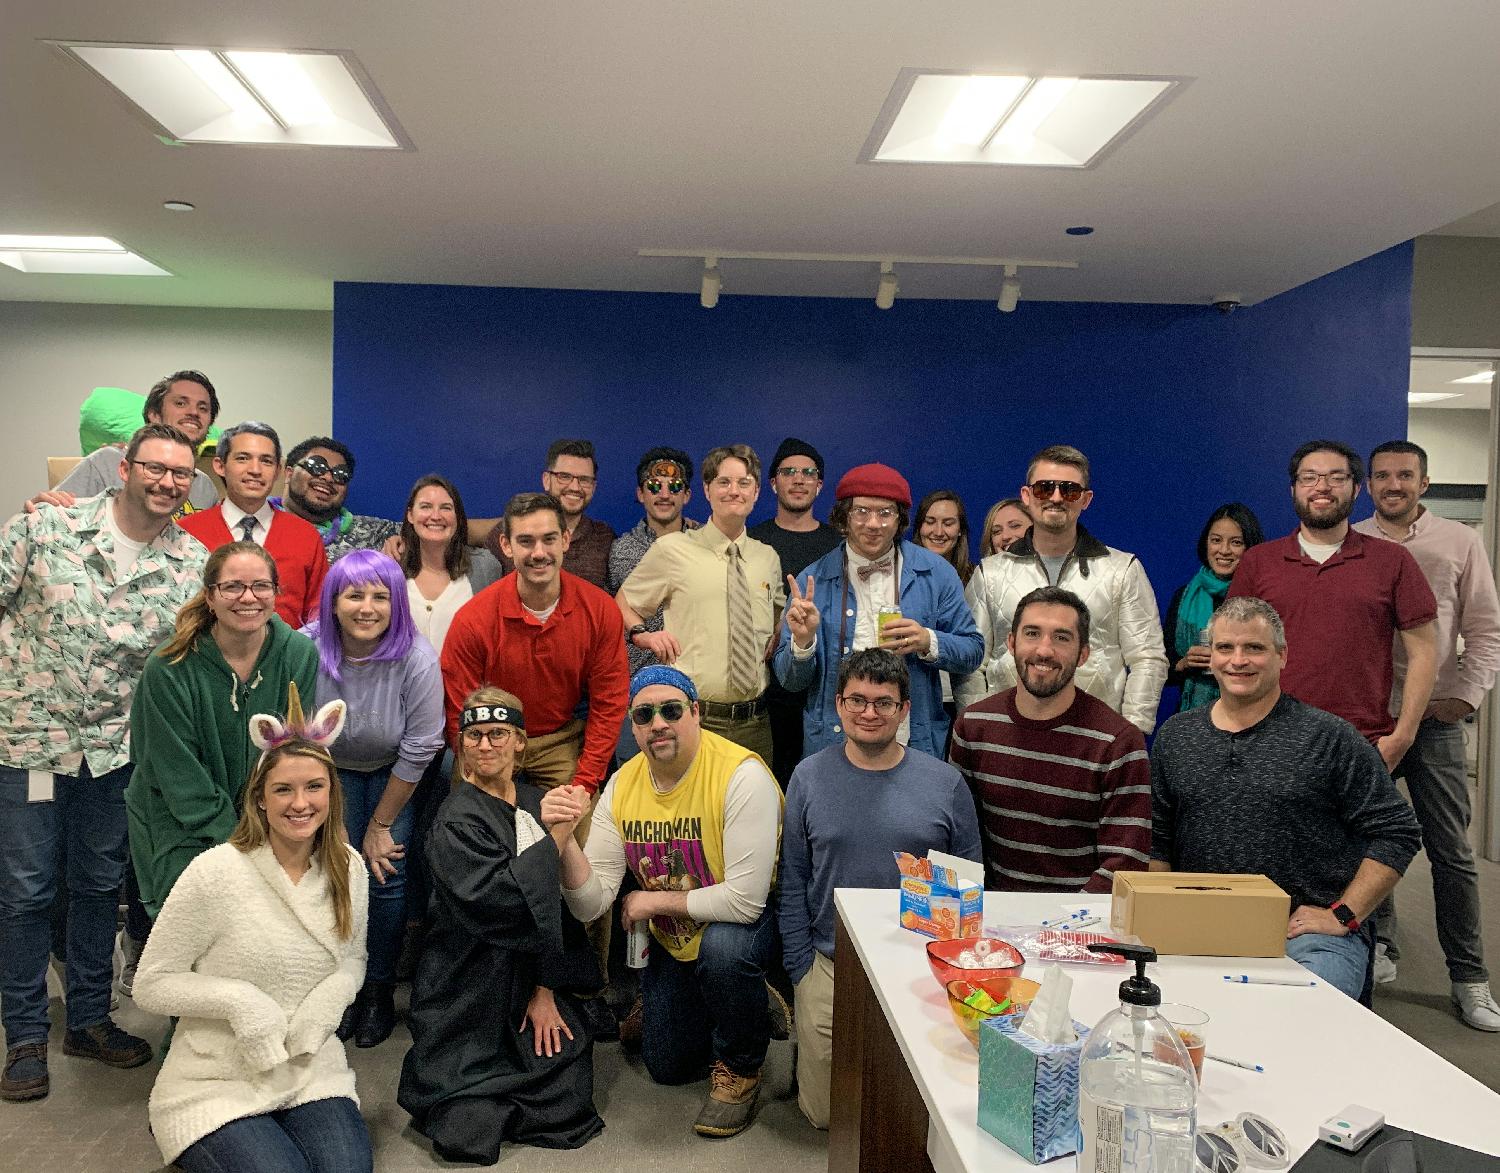 Halloween 2019 - lots of creative and fun costumes at our spooky office celebration!